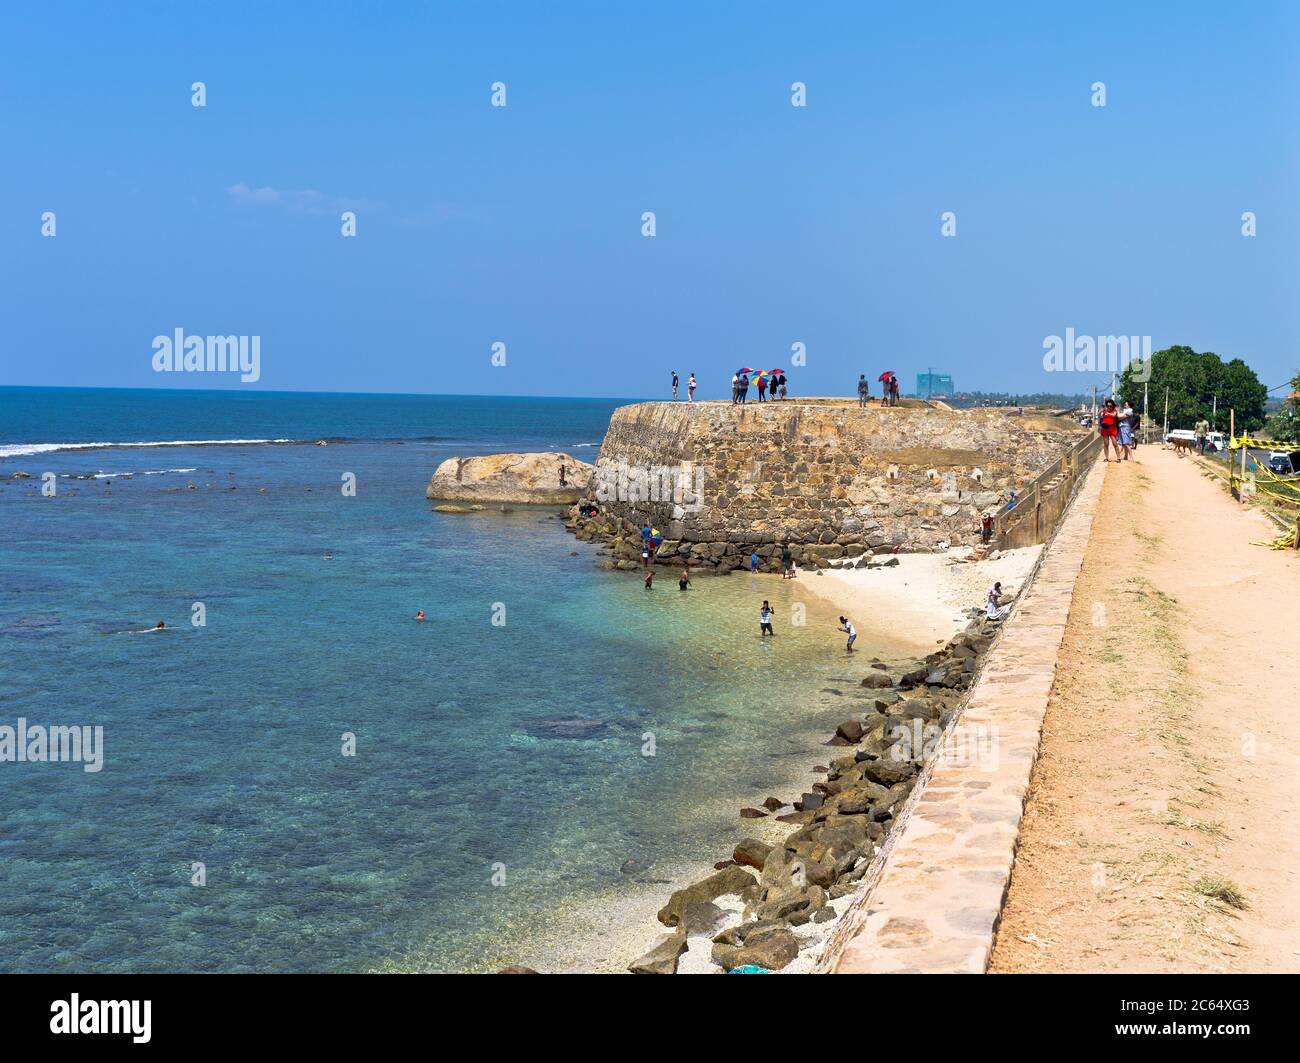 dh Colonial forts ramparts GALLE FORT SRI LANKA Dutch Fortress wall rampart battlements beach of people Stock Photo